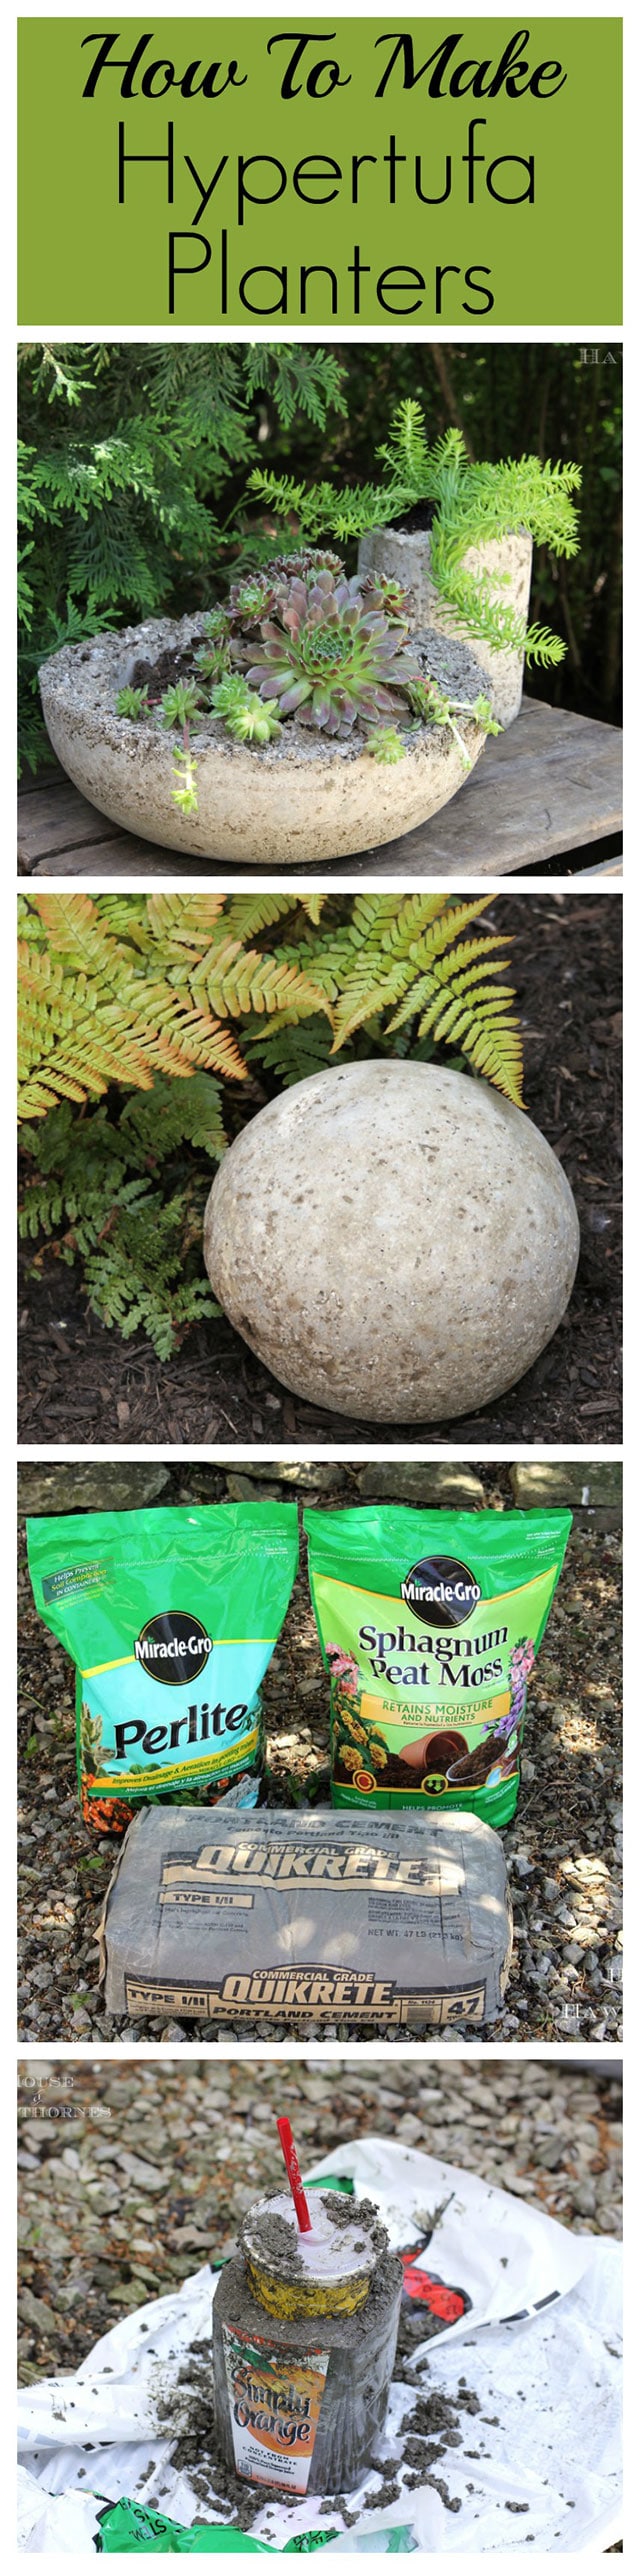 How to make lightweight hypertufa planters for your garden and patio. They look like concrete, but are much lighter!